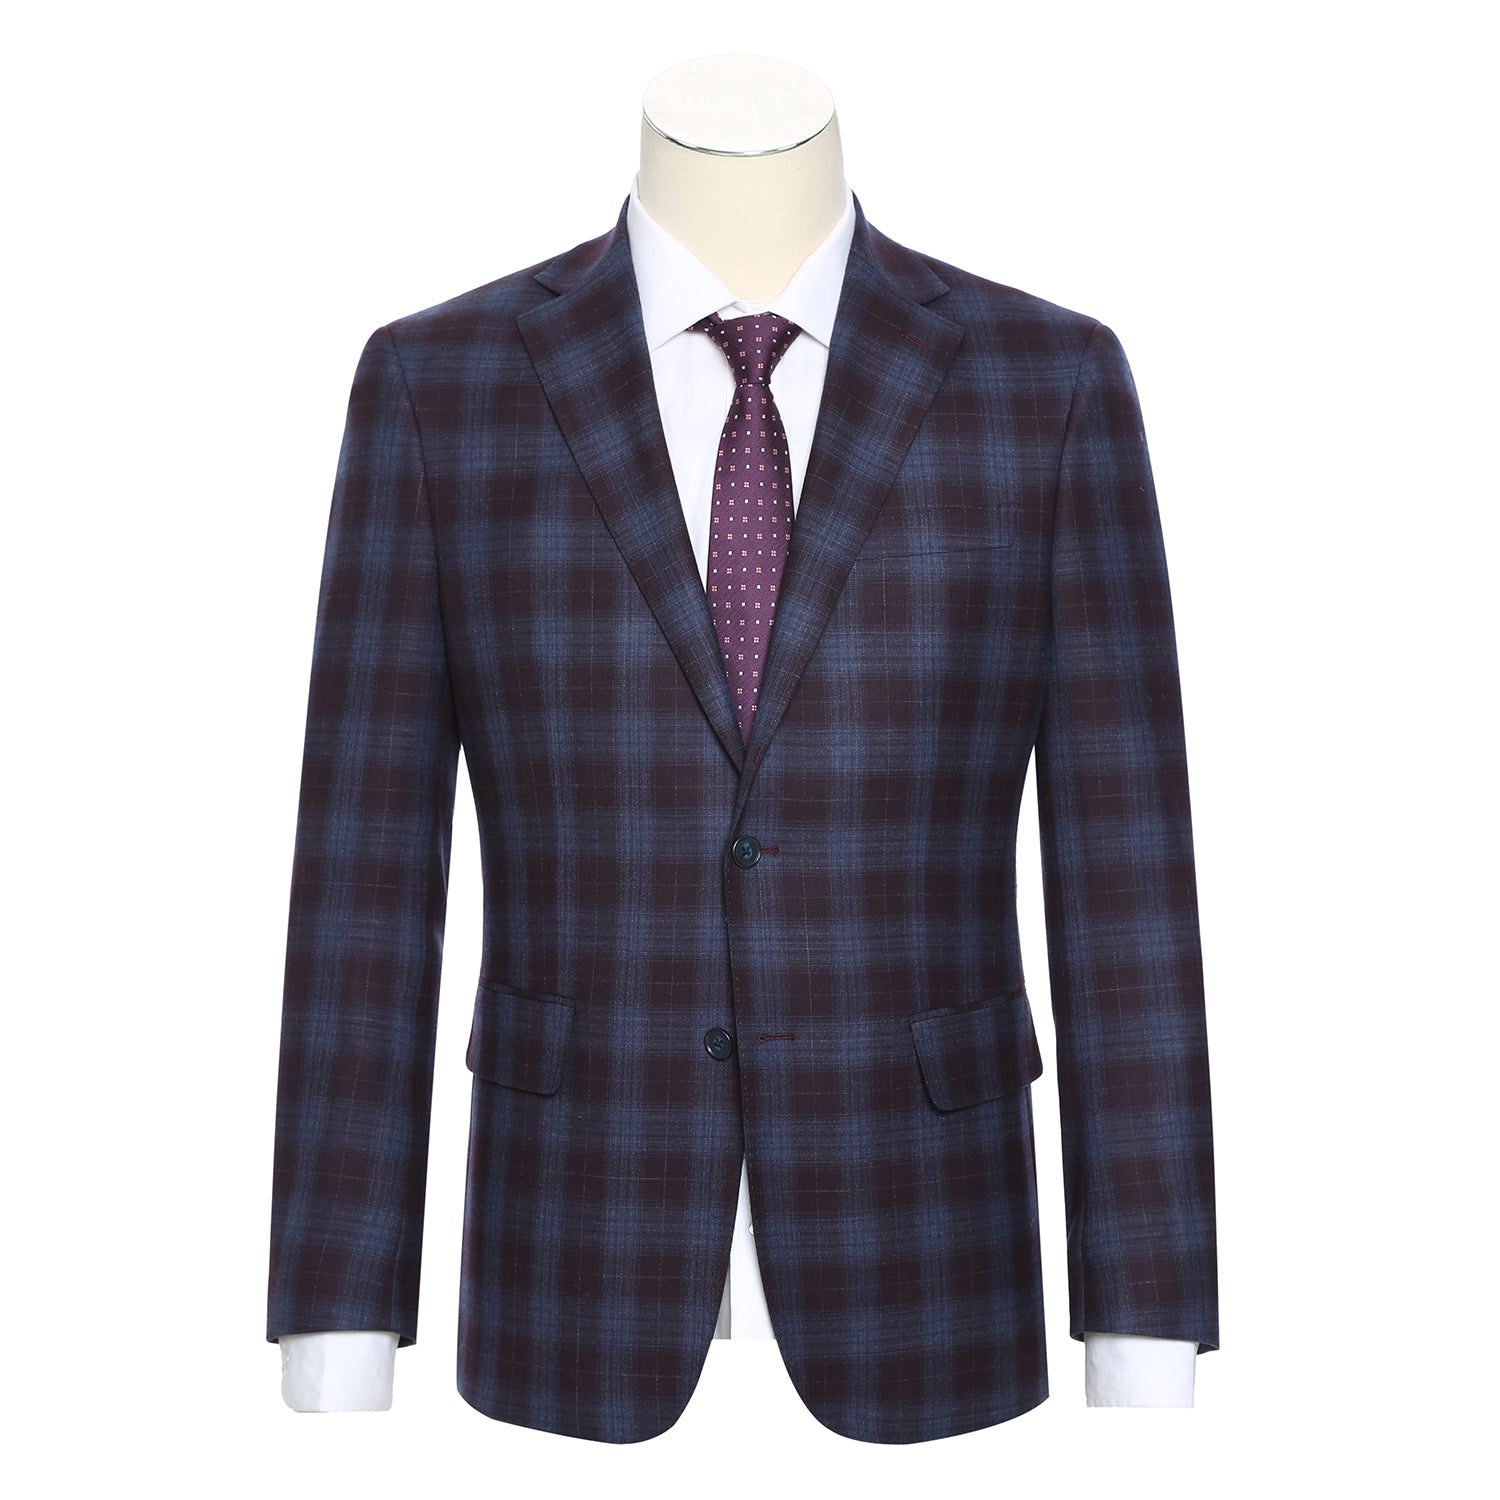 English Laundry Blue with Black Check Wool Suit 1